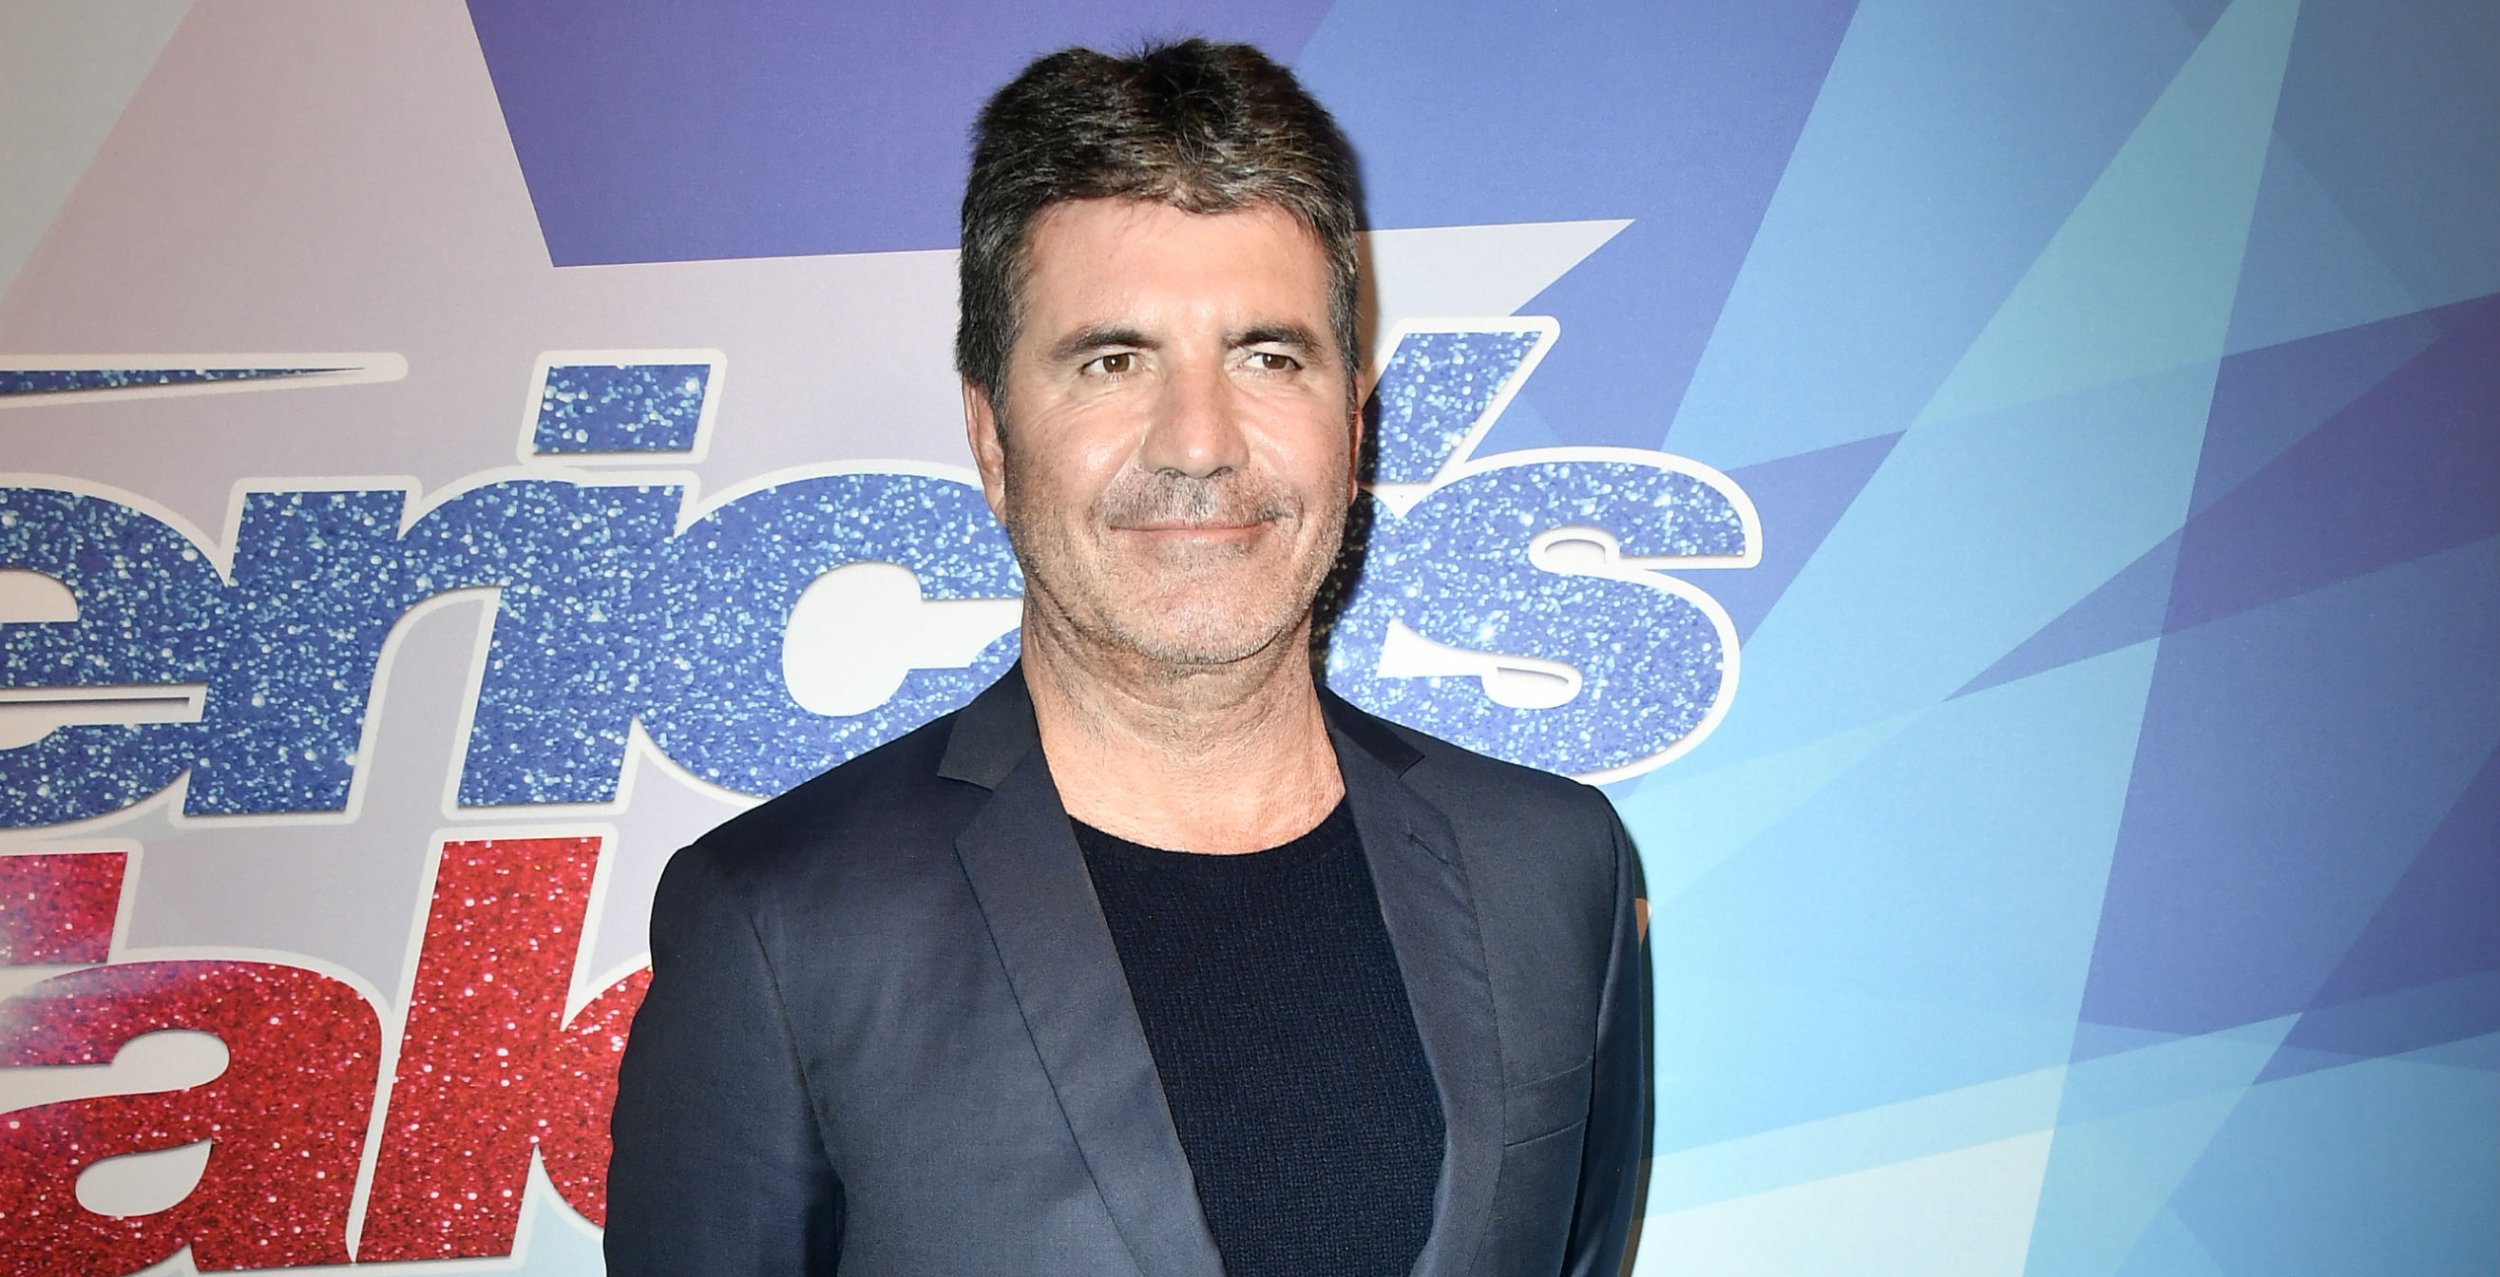 What Happened To Simon Cowell? ‘XFactor’ Judge Rushed To The Hospital